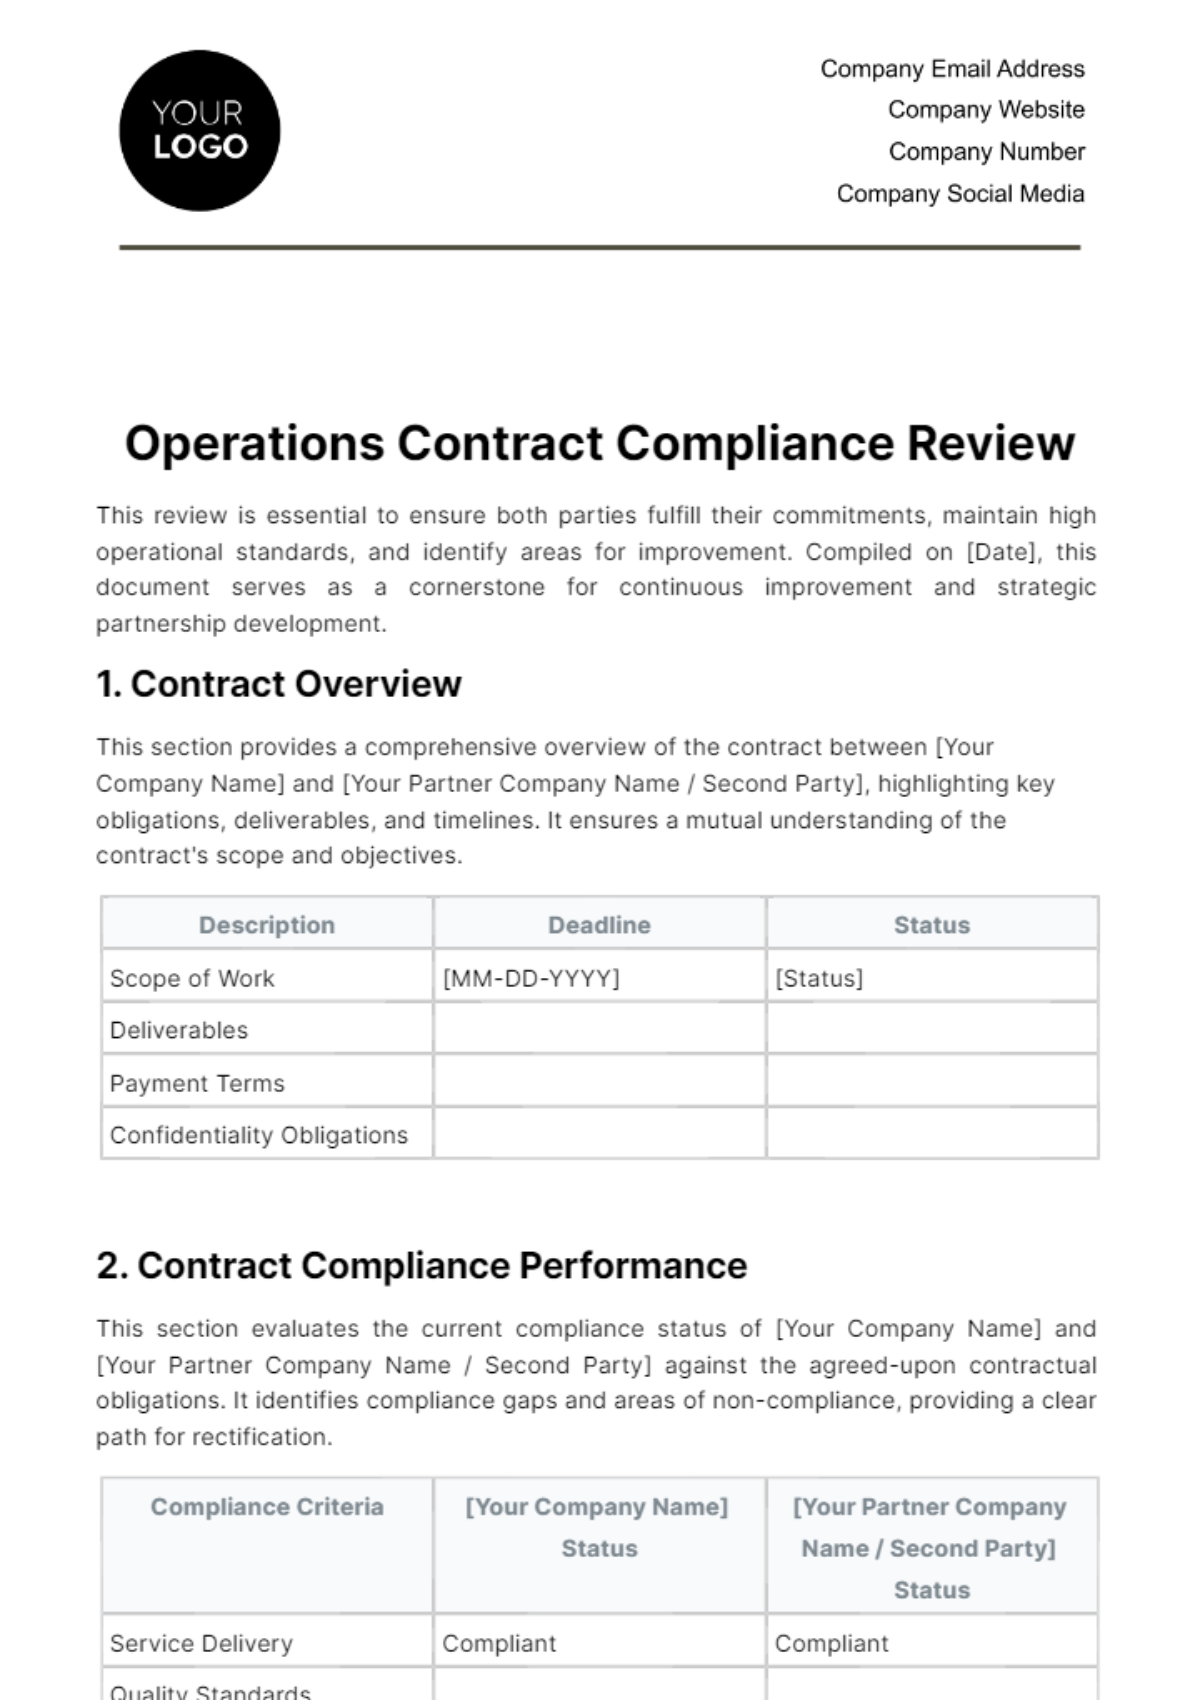 Operations Contract Compliance Review Template